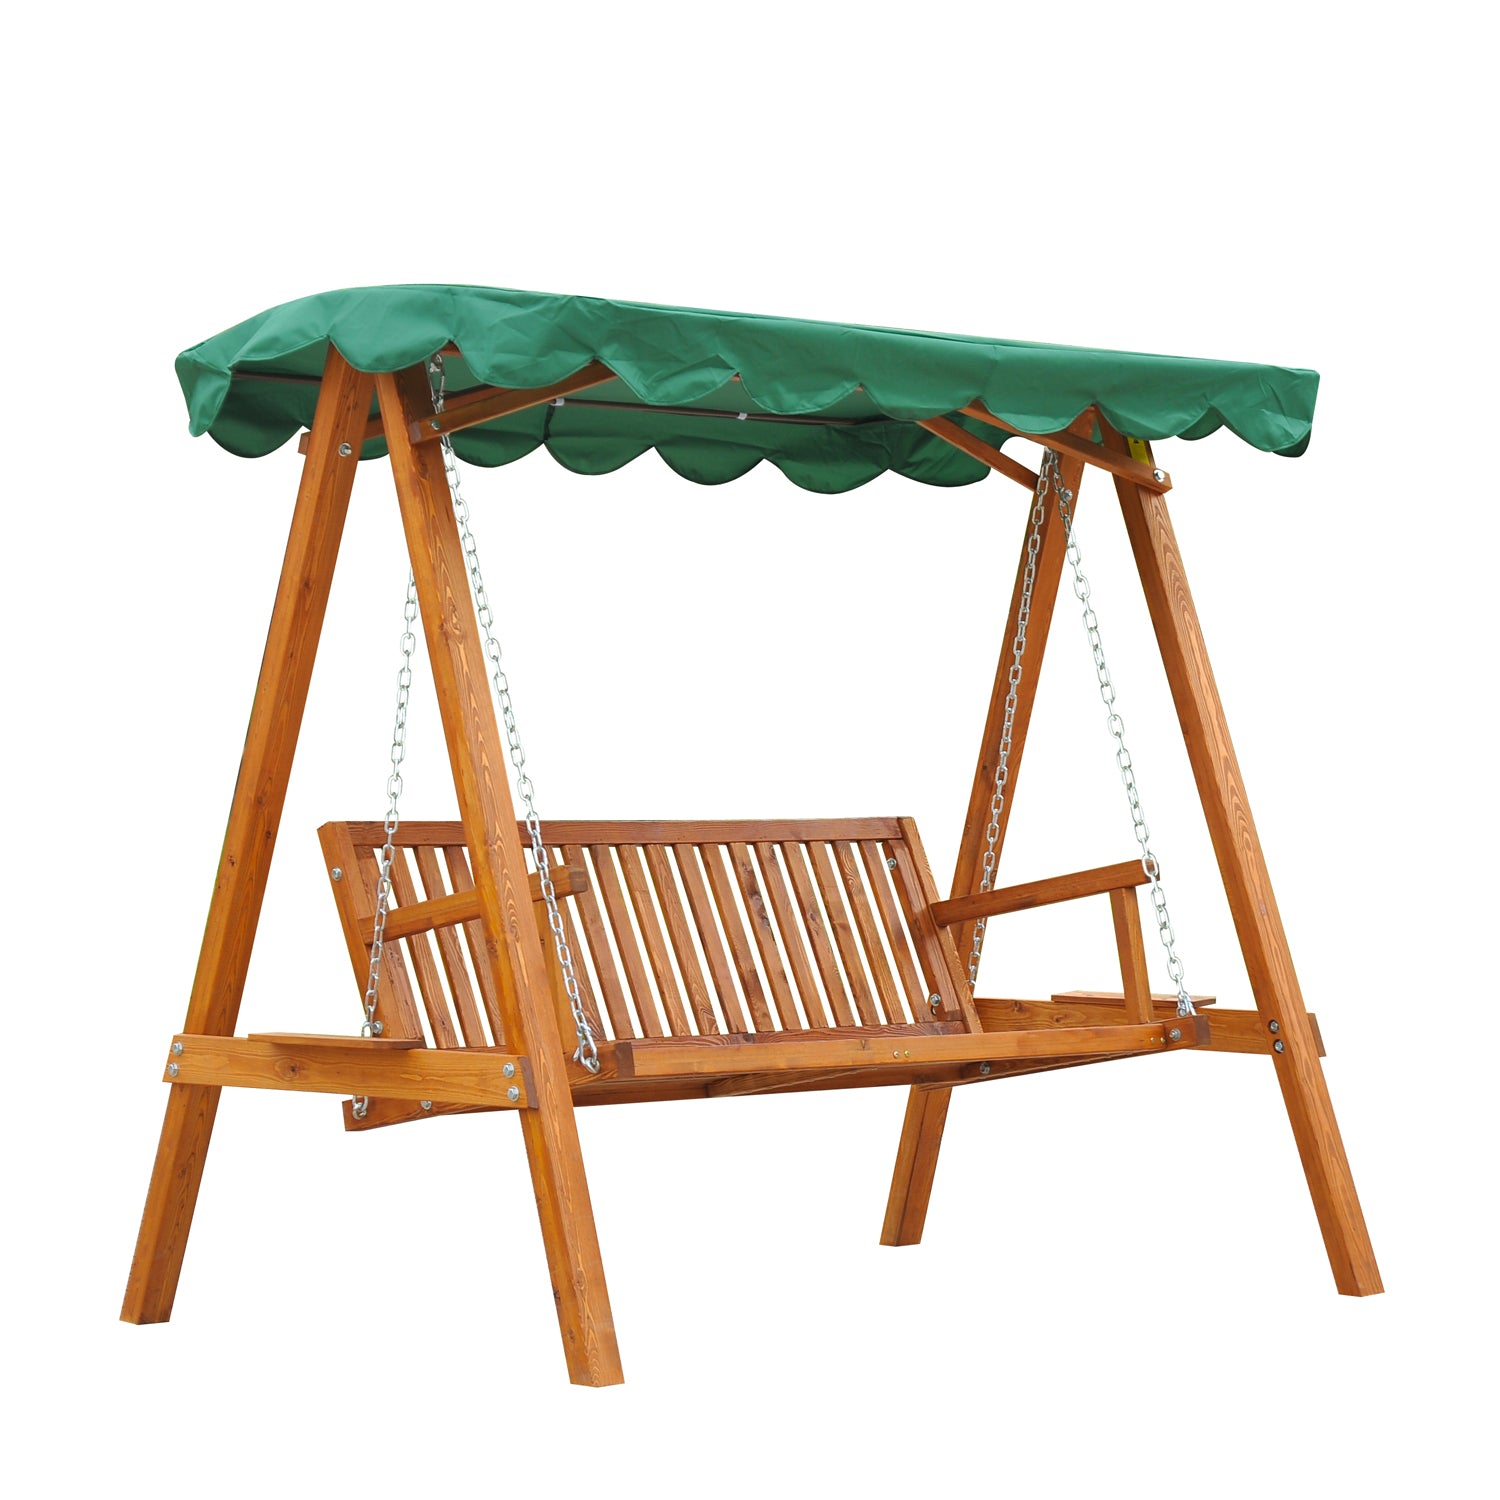 Outsunny Swing Chair 3 Seater Swinging Wooden Hammock Garden Seat Outdoor Canopy  | TJ Hughes